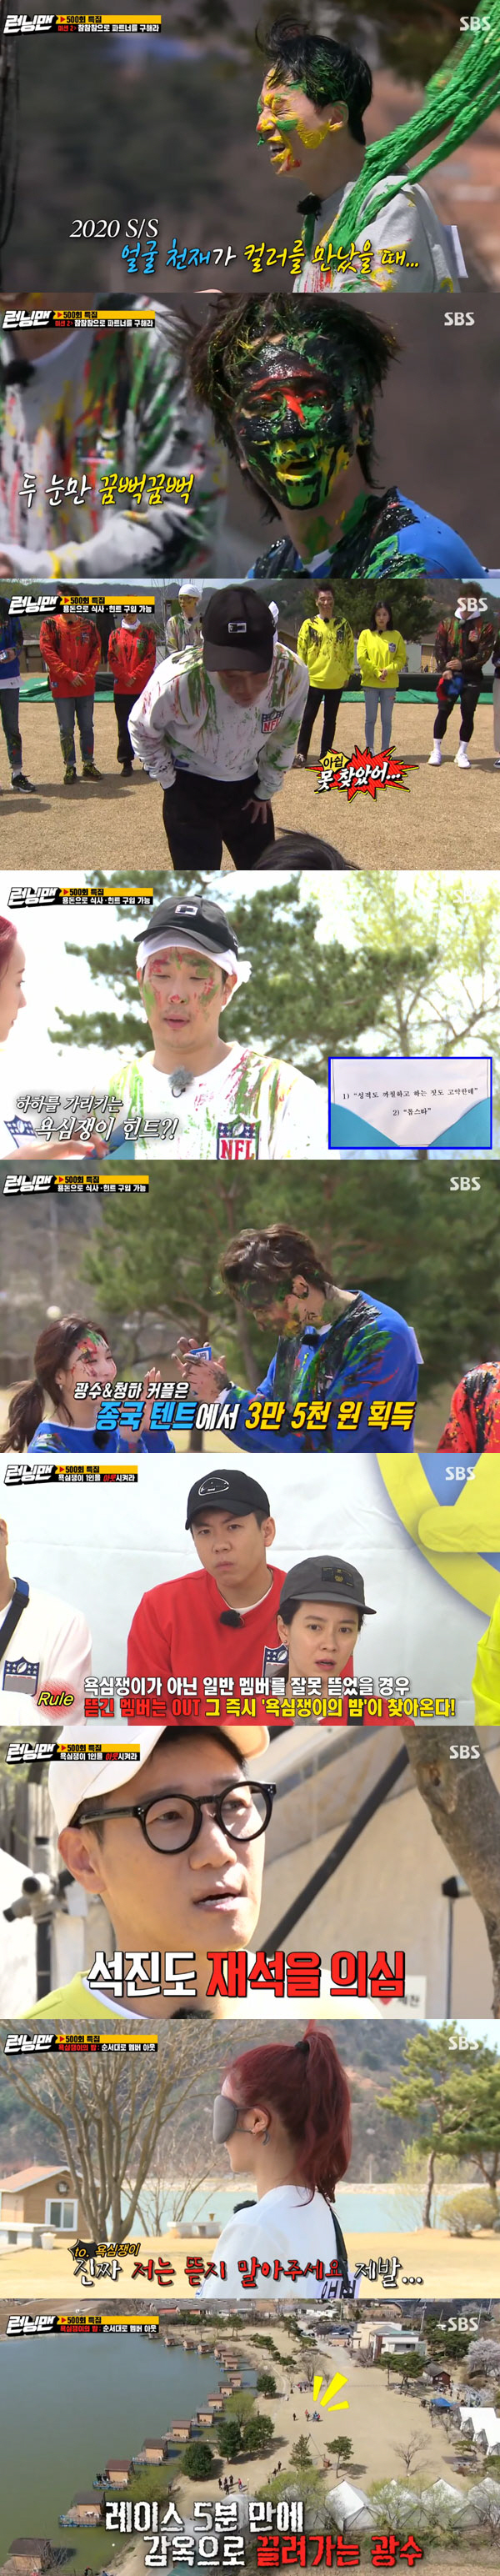 The greedy man who prepared the 500th special of Running Man was Jeon So-min.SBS Running Man, which was broadcast on the 26th, featured 500 times, with A Pink Bomi, Lantern, Chungha, Lovelys Americas and Wikimiki Yu-Jeong.On this day, Do you eat rice and run? Race, every round victory team is provided with a spring recreational set cooked by the chef. However, there is a greedy person who wants to eat the product.Members should find a greedy man in the final race and make an In-N-Out Burger.Each team will receive 100,000 won in basic allowance, and it is possible to purchase hints about greedy people by using the mission expenses hidden in each Tent.Each round winning team is provided with greedy hints and pocket money still time.The first mission was Get the quiz attached to your body, with Yoo Jae-Suk and Yu-Jeong, Ji Suk-jin and lanterns, Lee Kwang-soo and Chungha, Song Ji-hyo and Yang Se-chan, Kim Jong-kook and the Americas, Haha and Bomi teaming up.In the dance mission, they exploded with excitement, and Yoo Jae-Suk and Yu-Jeong, who won the first prize, chose Haha Tent and won 100,000 won in the Web.I also got a hint of greedy I am interested in health.The second-place Ji Suk-jin lantern won Lee Kwang-soo Tent in the Web, unfortunately 2,000 won.Kim Jong-kook Americas won Ji Suk-jin Tent Caught in the Web, 67,000 won.The second round was a mission to Save a partner with a true heart, one of the couples was seated on the conveyor belt, and the other one was confronted with five opponents.As a result, the first Haha Bomi team, the second Kim Jong-kook Americas team, and the third Lee Kwang-soo Chungha team.Haha Bomi unfortunately failed to acquire Mission Rain, but he got a greedy hint of top star.Kim Jong-kook The Americas team won 22,000 won at Yang Se-chan Tent and Lee Kwang-soo Chungha won 35,000 won at Kim Jong-kook Tent.The final round was to find a greedy one, and after searching for hidden hints, a couple who ripped off the greedy name tag will win the final victory, but once every five minutes, the greedy night comes.All members will be temporarily suspended with their eye bandages on, and only greedy will move in one by one in the order set by greedy.If you mislead a general member, not a greedy person, the torn member is In-N-Out Burger, and immediately the night of greedy comes.The members who found the hint came to the first greedy night with Kim Jong-kook suspected as a greedy.The first target of greedy Lee Kwang-soo was the first to be In-N-Out Burger.The greedys second target was Lee Mi-ju, when Bomi removed Kim Jong-kooks name tag and Kim Jong-kook was not greedy.With the greedy third target Song Ji-hyo in-N-Out Burger, the most likely suspect was Yoo Jae-Suk as Kim Jong-kooks In-N-Out Burger.So the lantern removed the name tag of Yoo Jae-Suk, and Yoo Jae-Suk was not a greedy person either.The current survivors were Haha, Yang Se-chan, lanterns and Bomi, with Yu-Jeong and Chungha being In-N-Out Burger.At that time, the surviving members revealed that the greedy person was Jeon So-min through the hints they obtained.Yang Se-chan, who later realized that the safe secret number was Jeon So-mins birthday, opened the safe, and Yang Se-chan and Song Ji-hyo won the championship.The members called Jeon So-min, who laughed when asked why the first was male.Then, Jeon So-min said, Do not worry too much, I will recover quickly and find you.